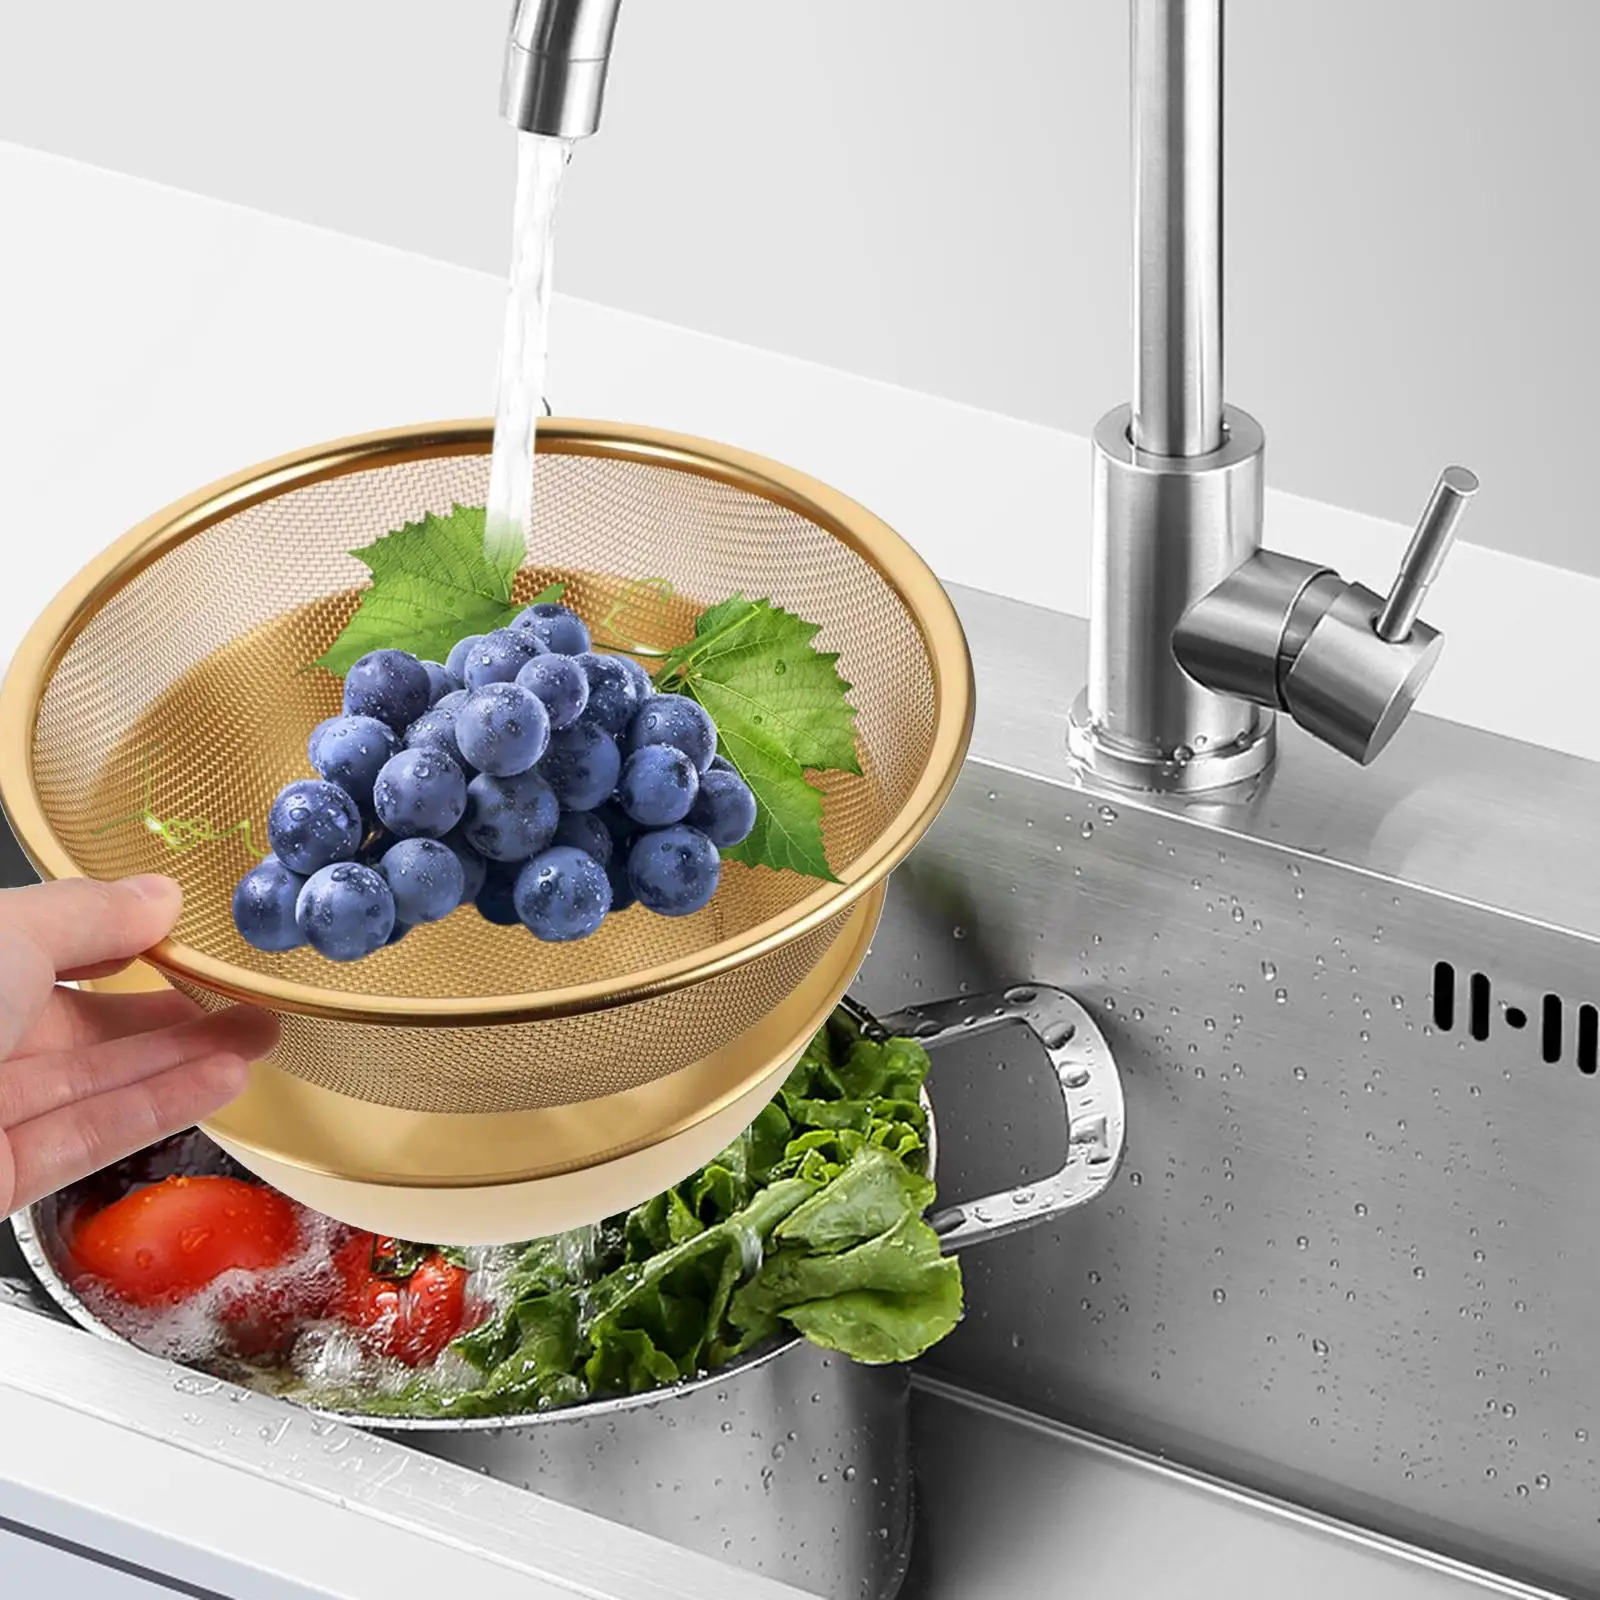 Stainless Steel Colander Bowl Stackable Kitchen Strainer Washer Multifunctional Draining Basket for Mixing Cleaning Fruits Pasta